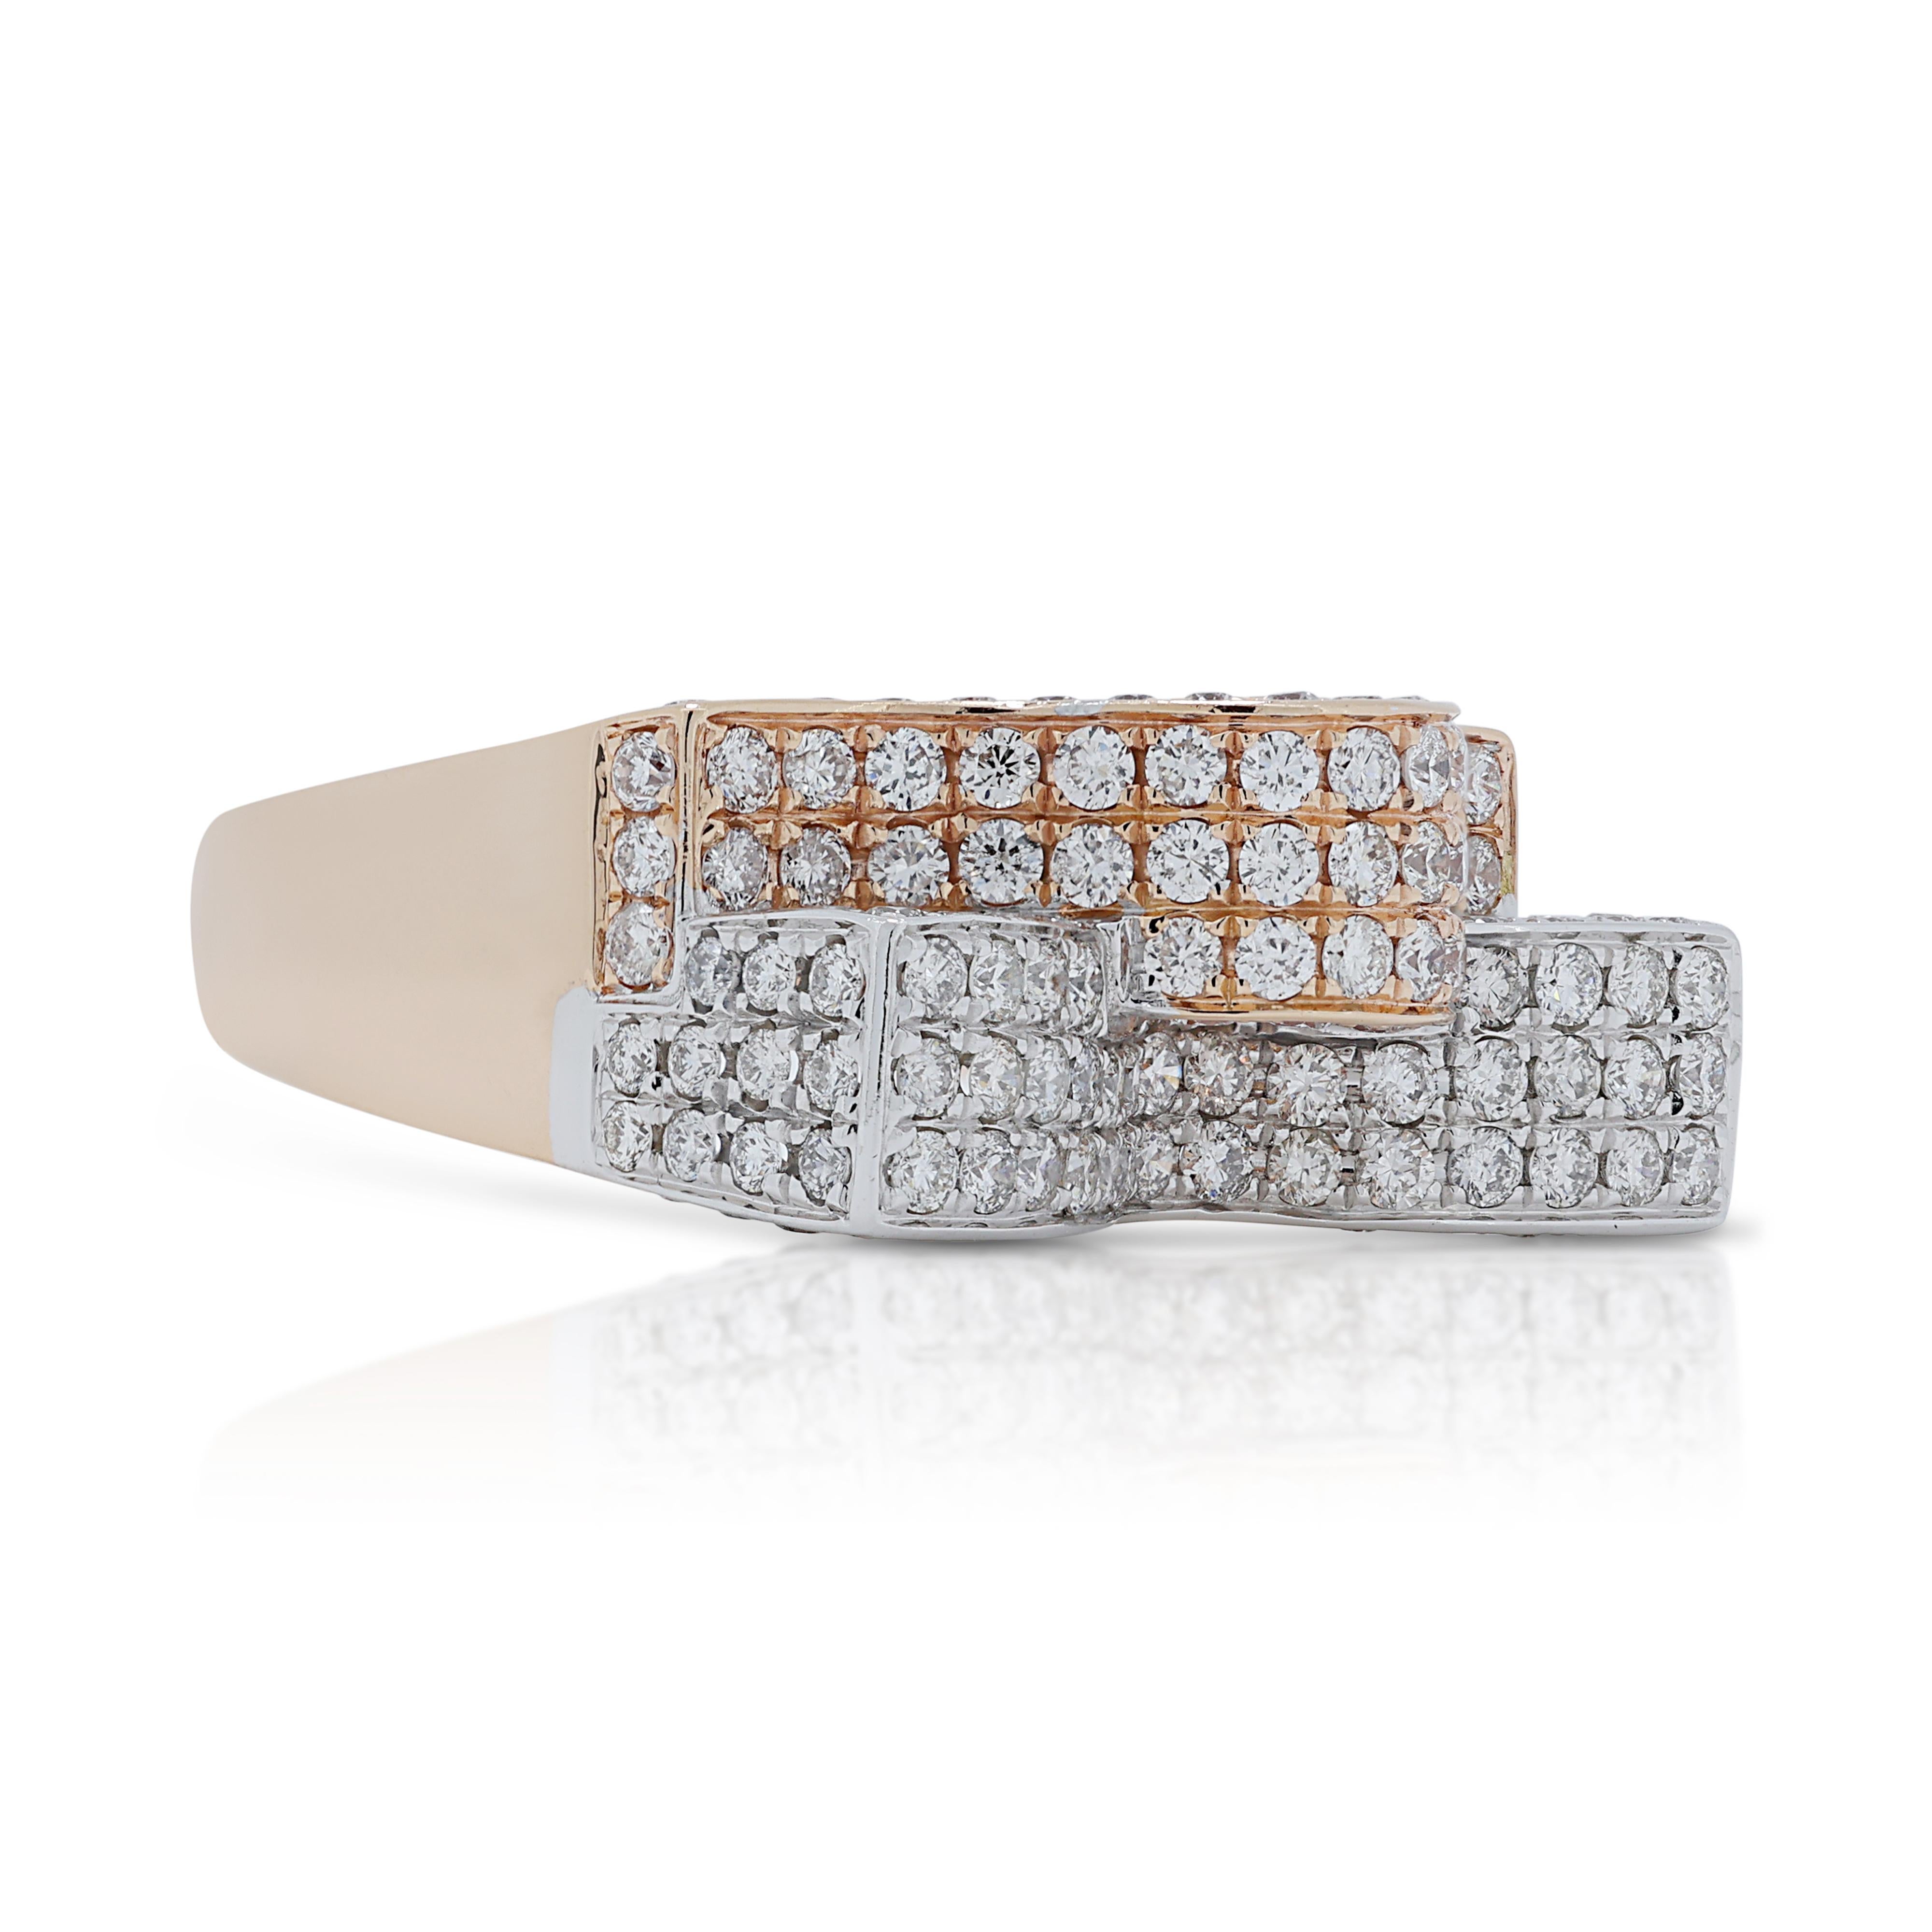 Stunning 1.60ct Diamonds Ring in 18K White & Rose Gold In New Condition For Sale In רמת גן, IL